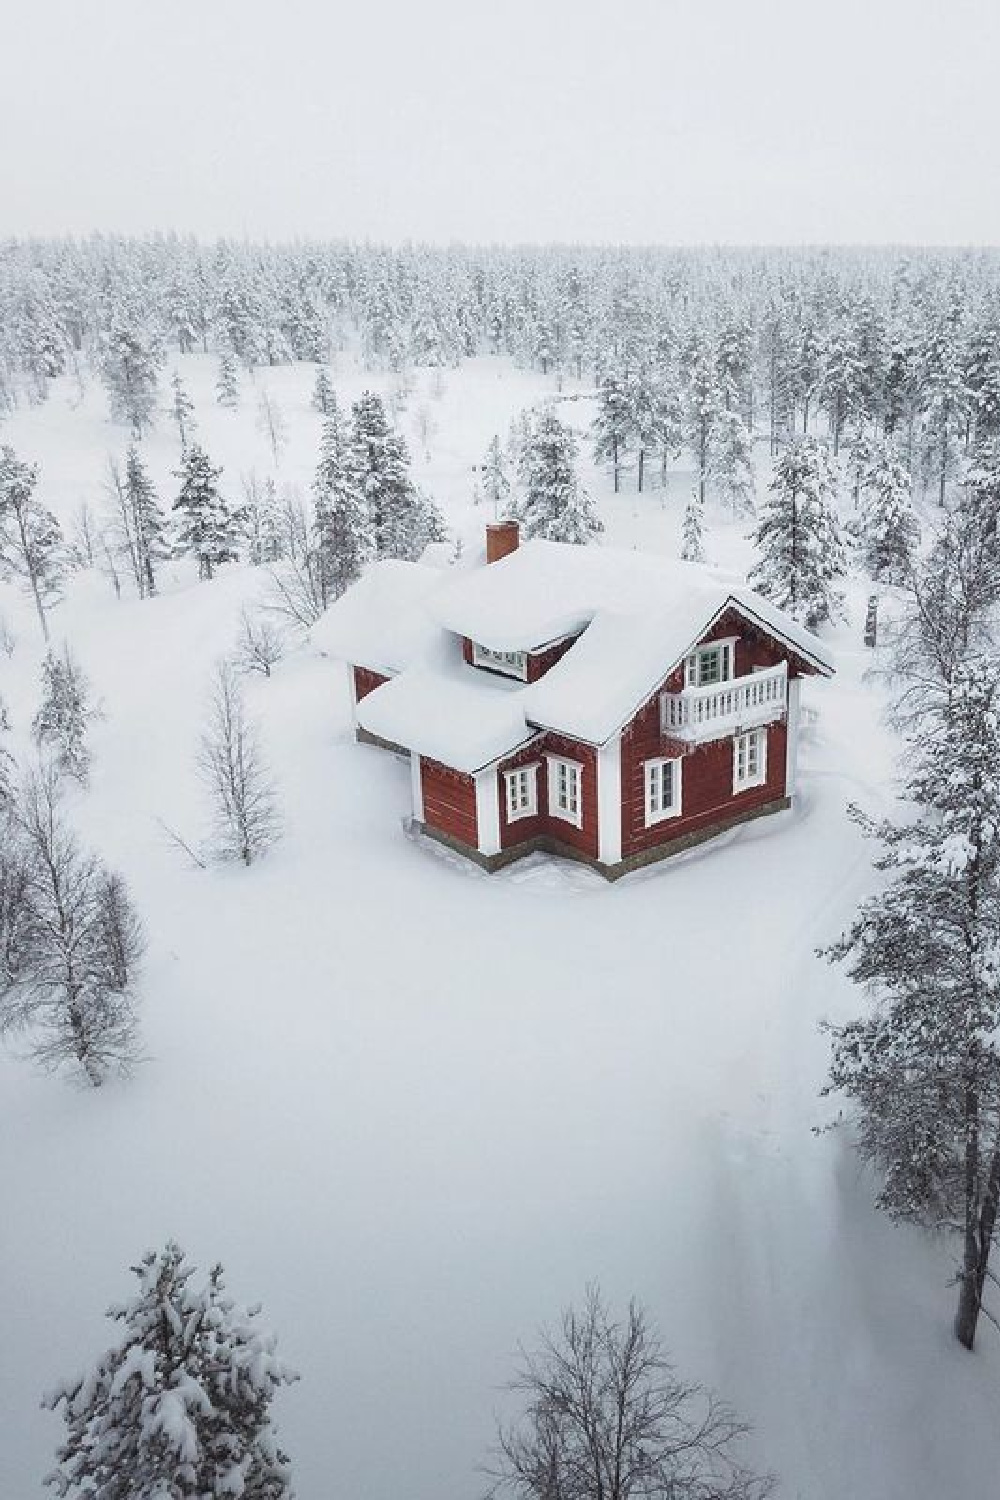 Cozy red winter cabin in snowy woods - @monders. #christmascabins #snowywoods